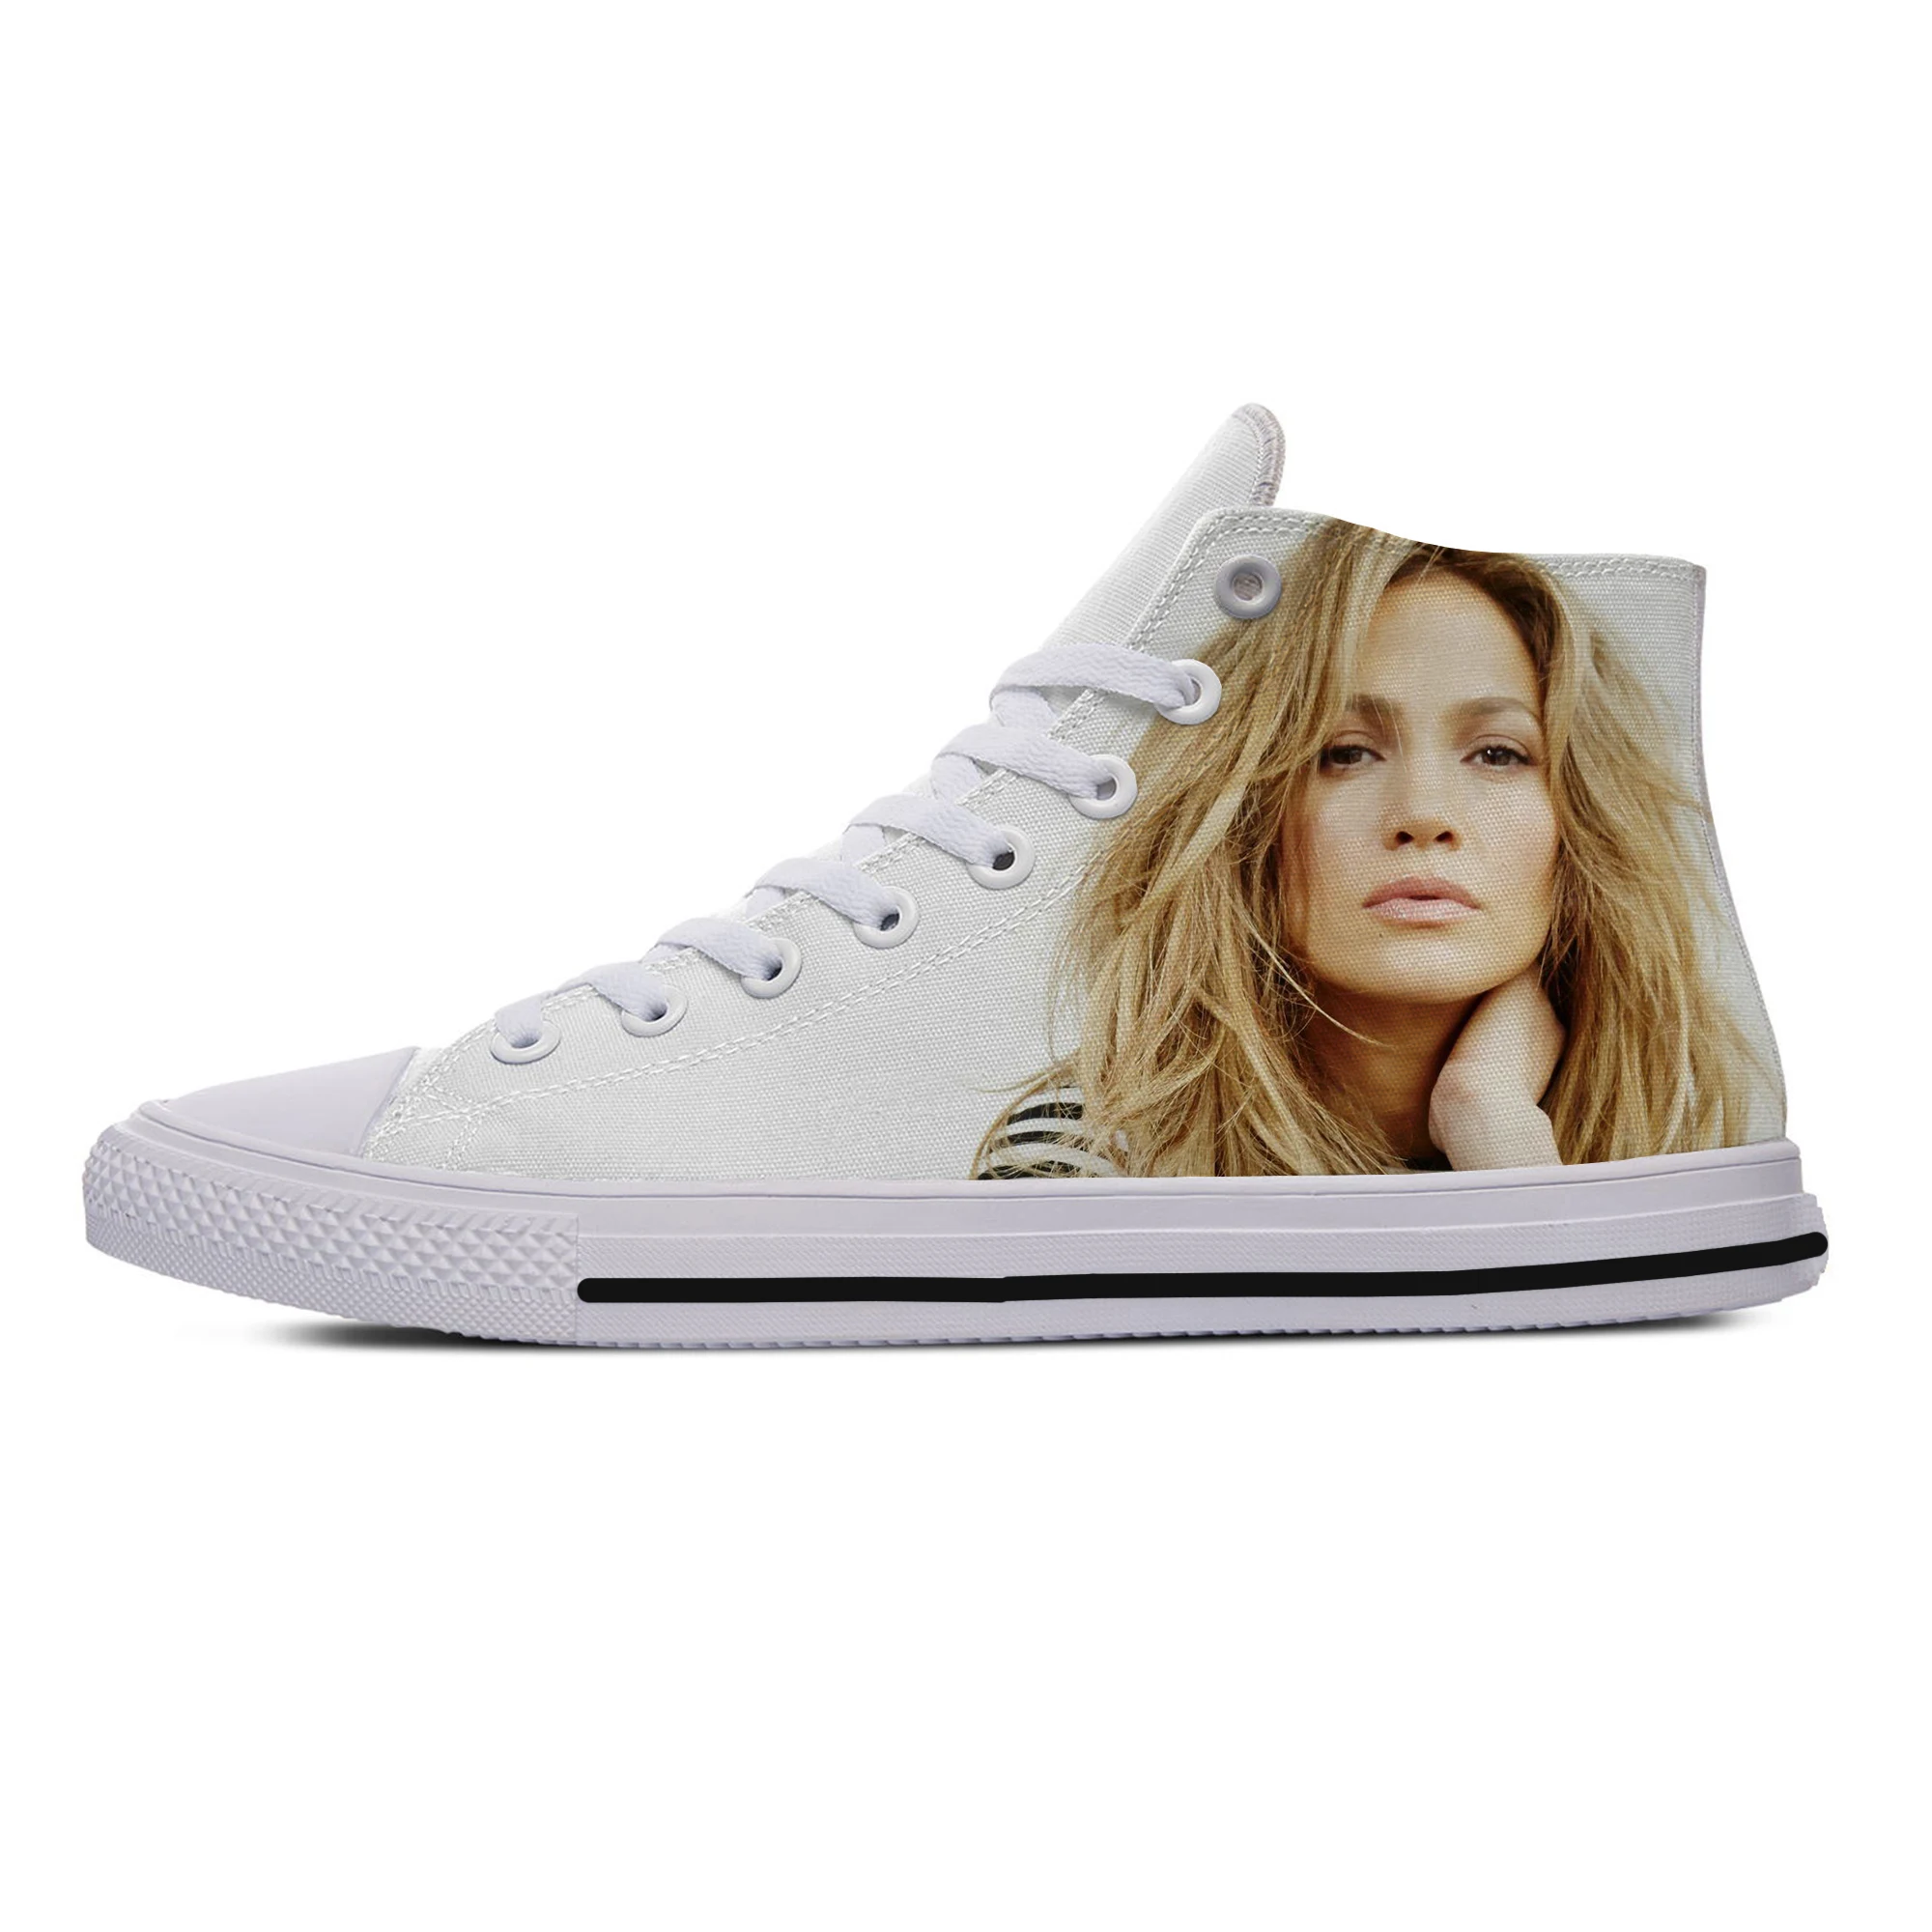 

Hot Jennifer Lopez Singing Inside You Music Give Me Life Shoes Lightweight Leisure Breathable Board Shoes High Top Canvas Shoes